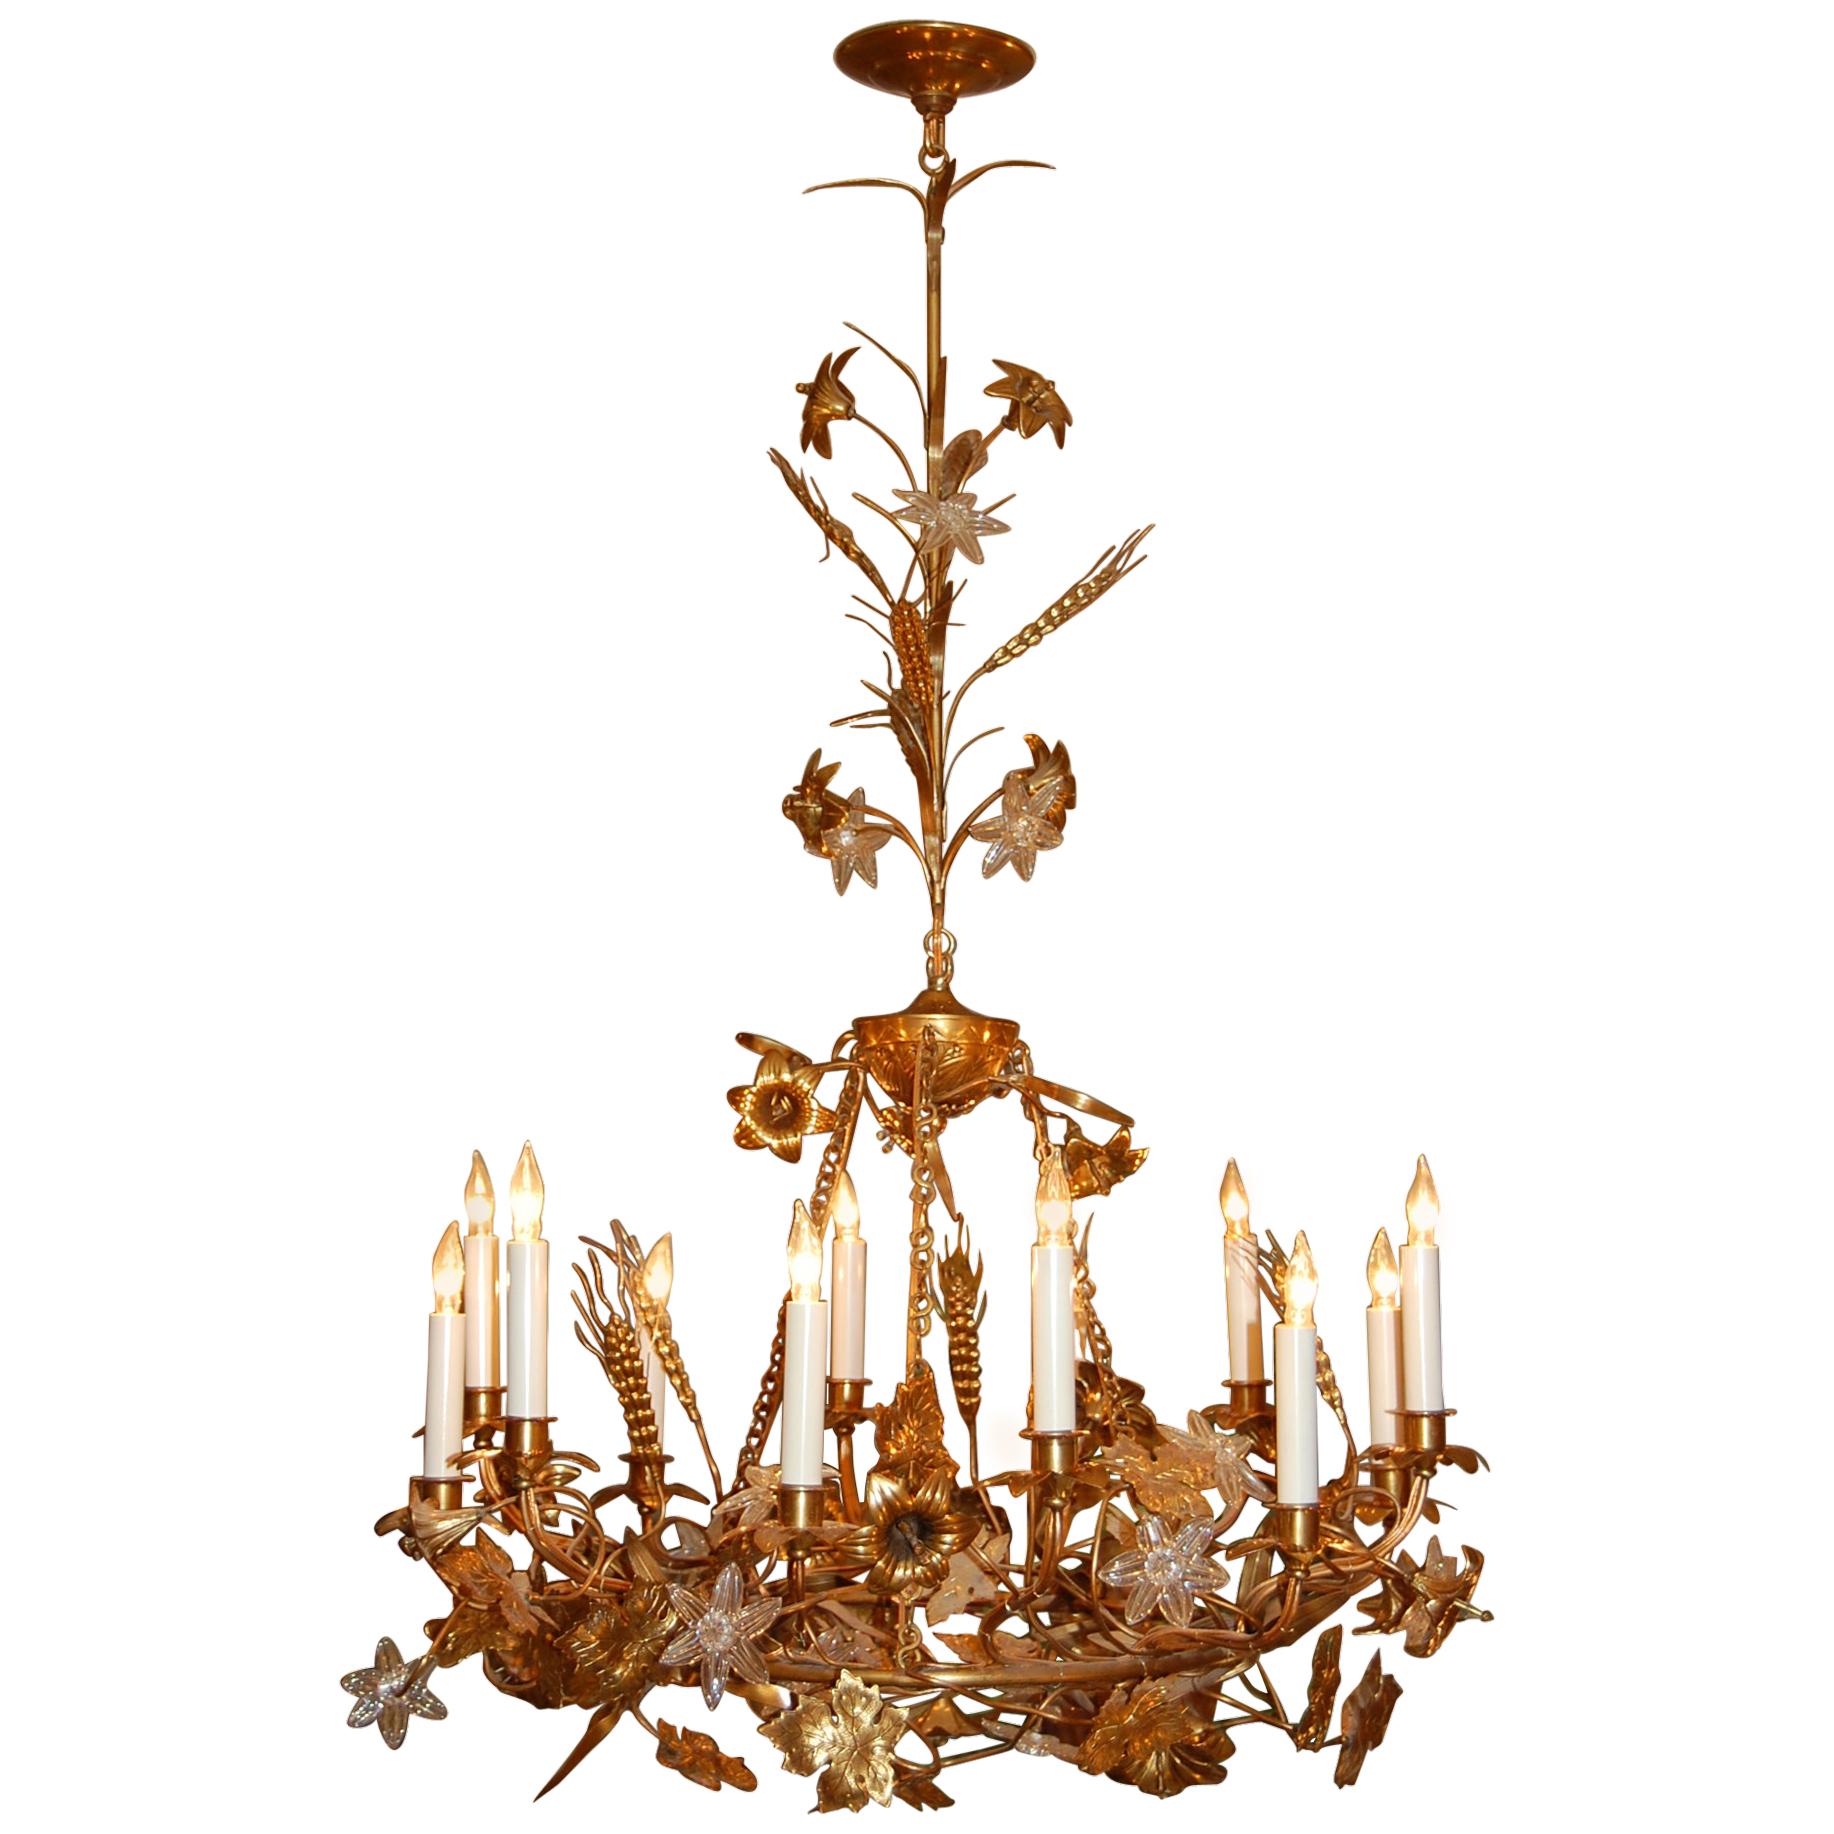 Gilt Brass Chandelier with Clusters of Brass Grapes, Leaves and Sheaths of Wheat